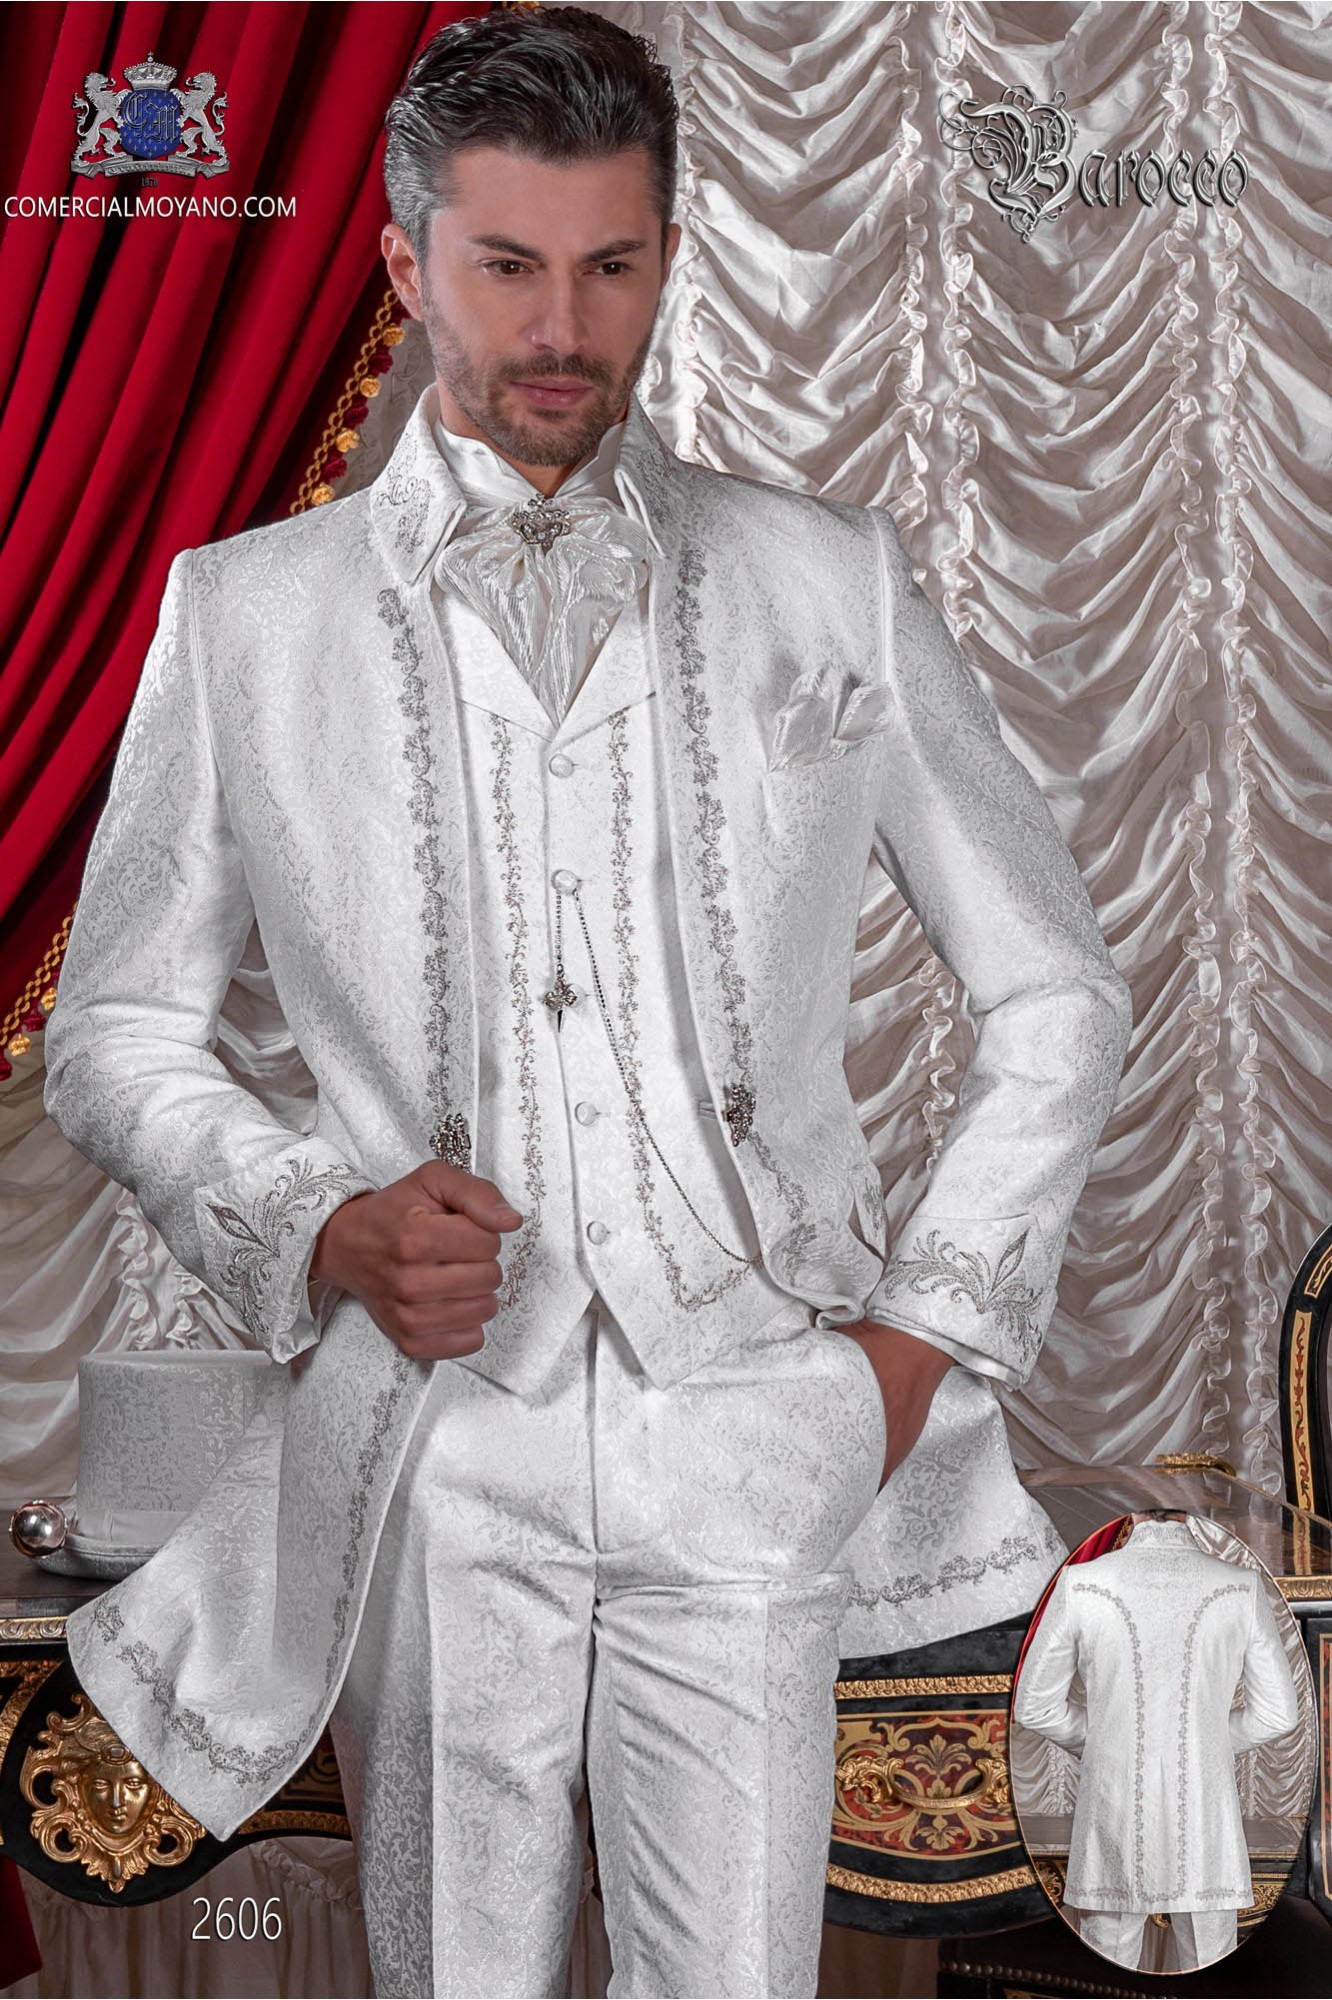 Vintage Napoleon collar frock coat in white jacquard fabric with silver embroidery and crystal clasp model 2606 Mario Moyano